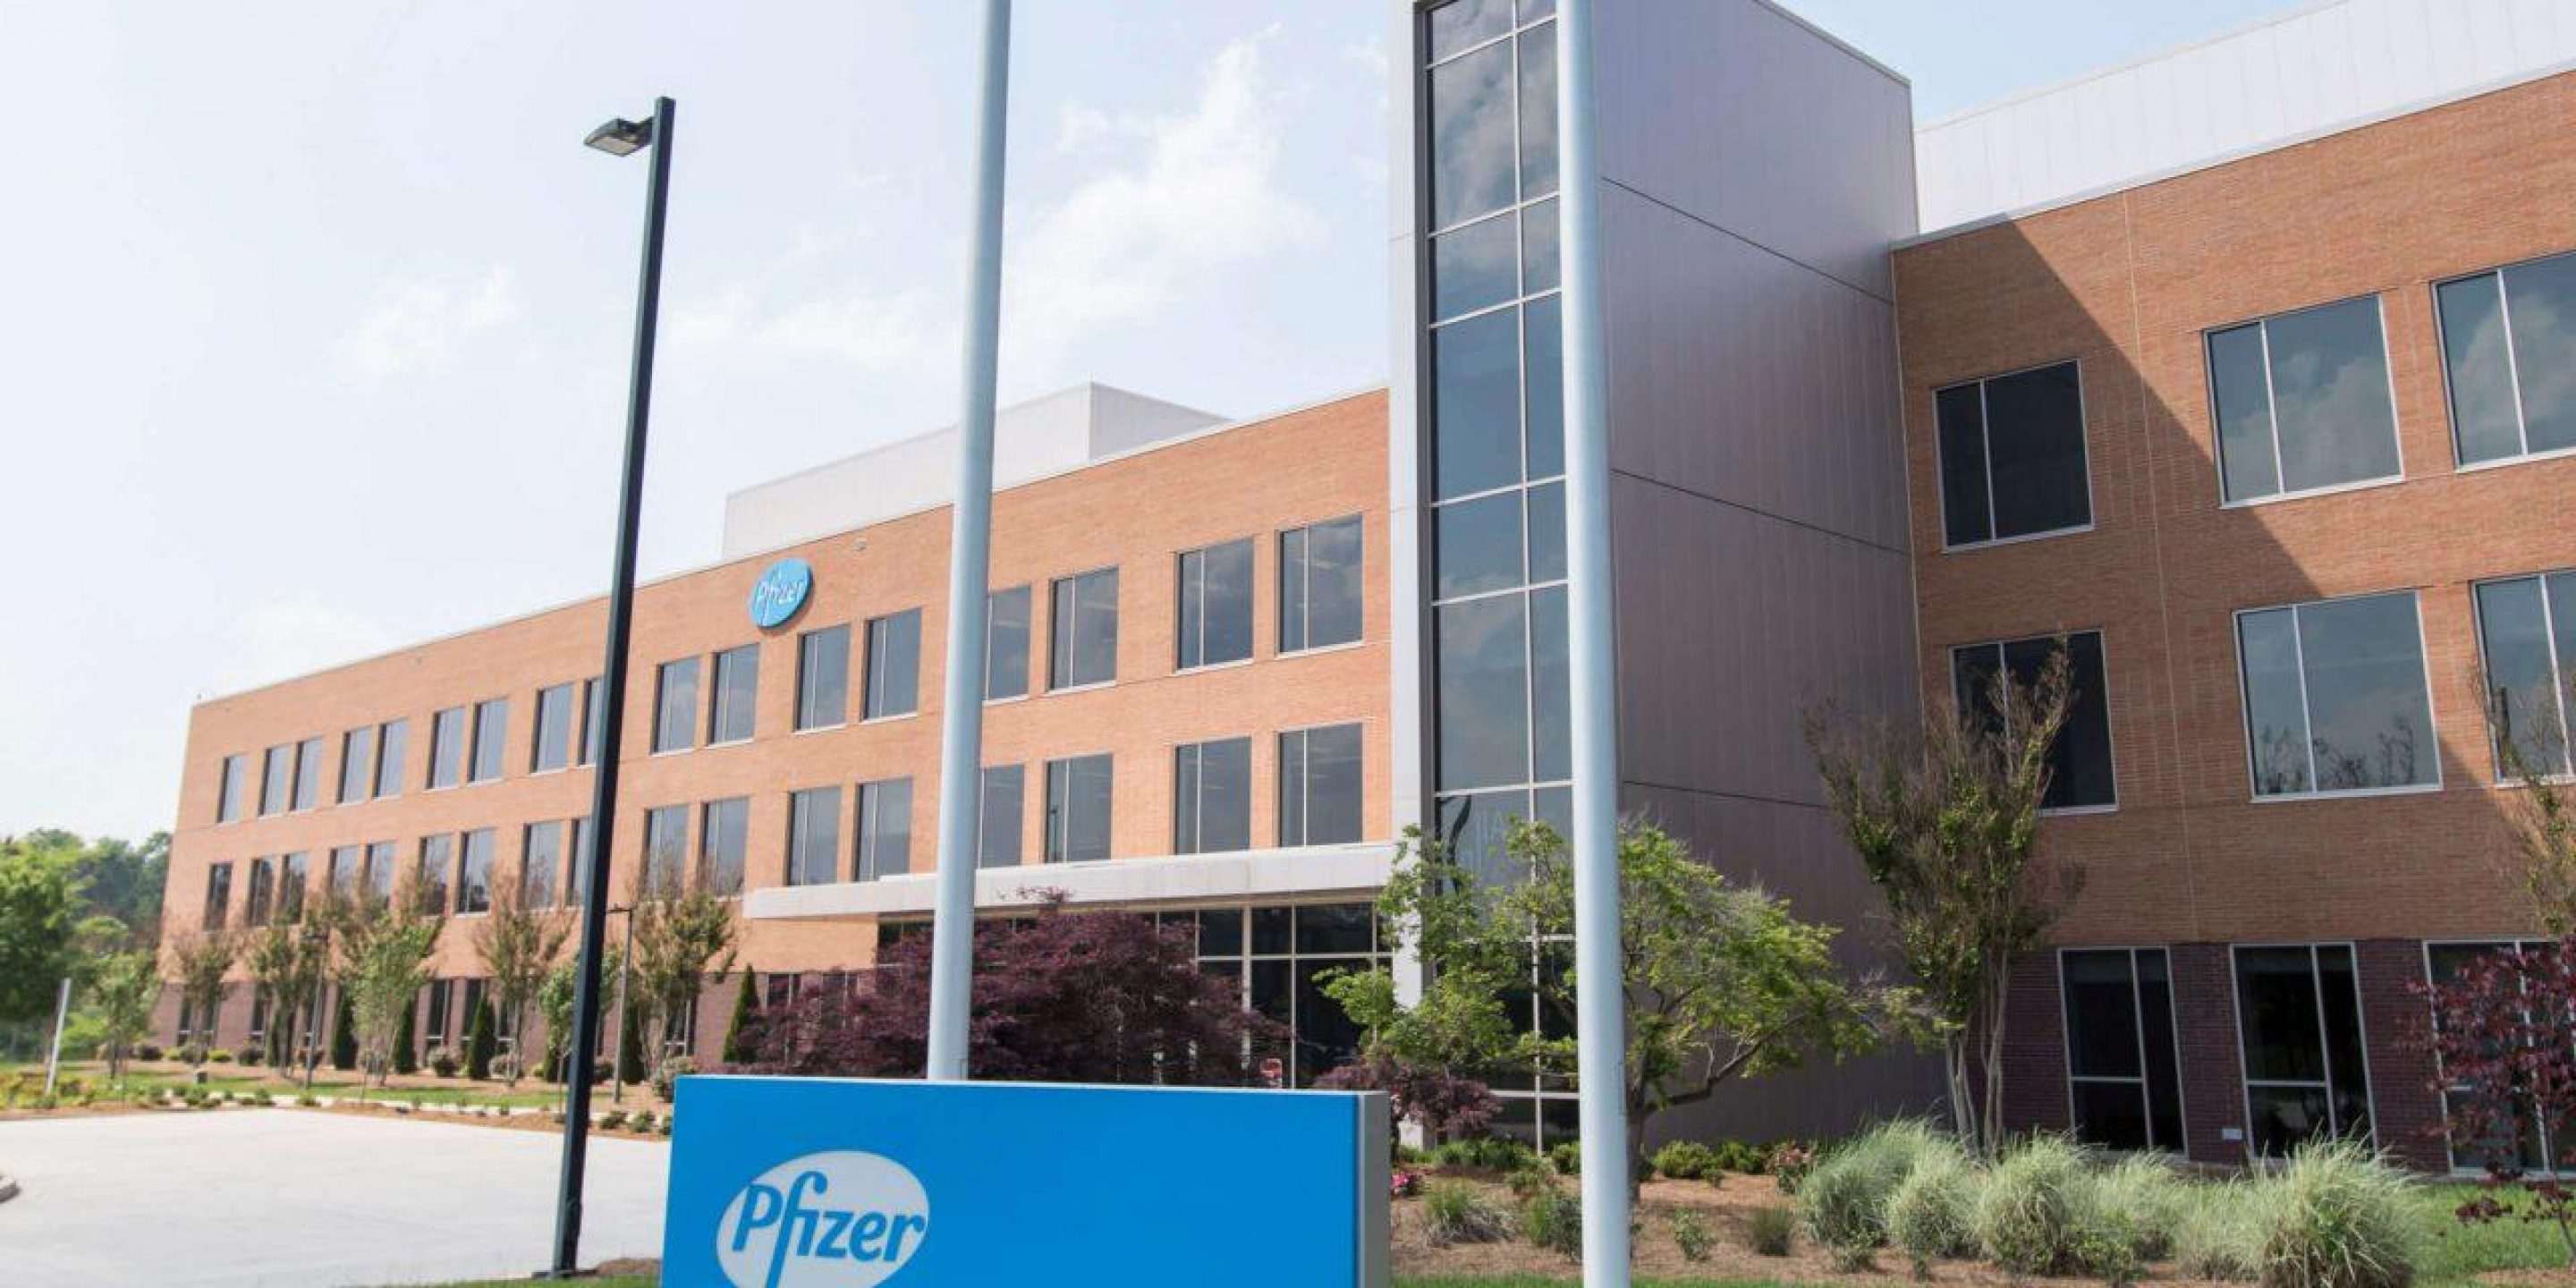 Pfizer Sanford Exterior for the Installation Qualification of Pharmaceutical Equipment